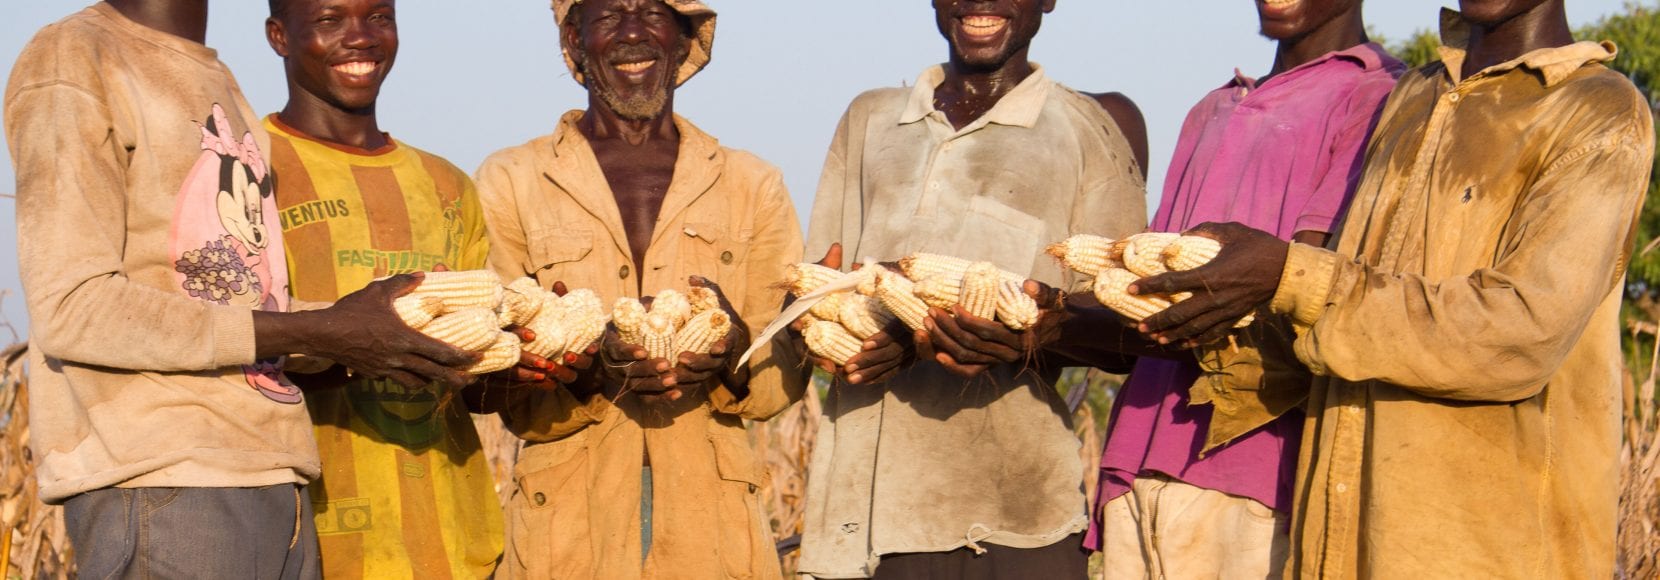 Group of farmers smiling holding corn crops